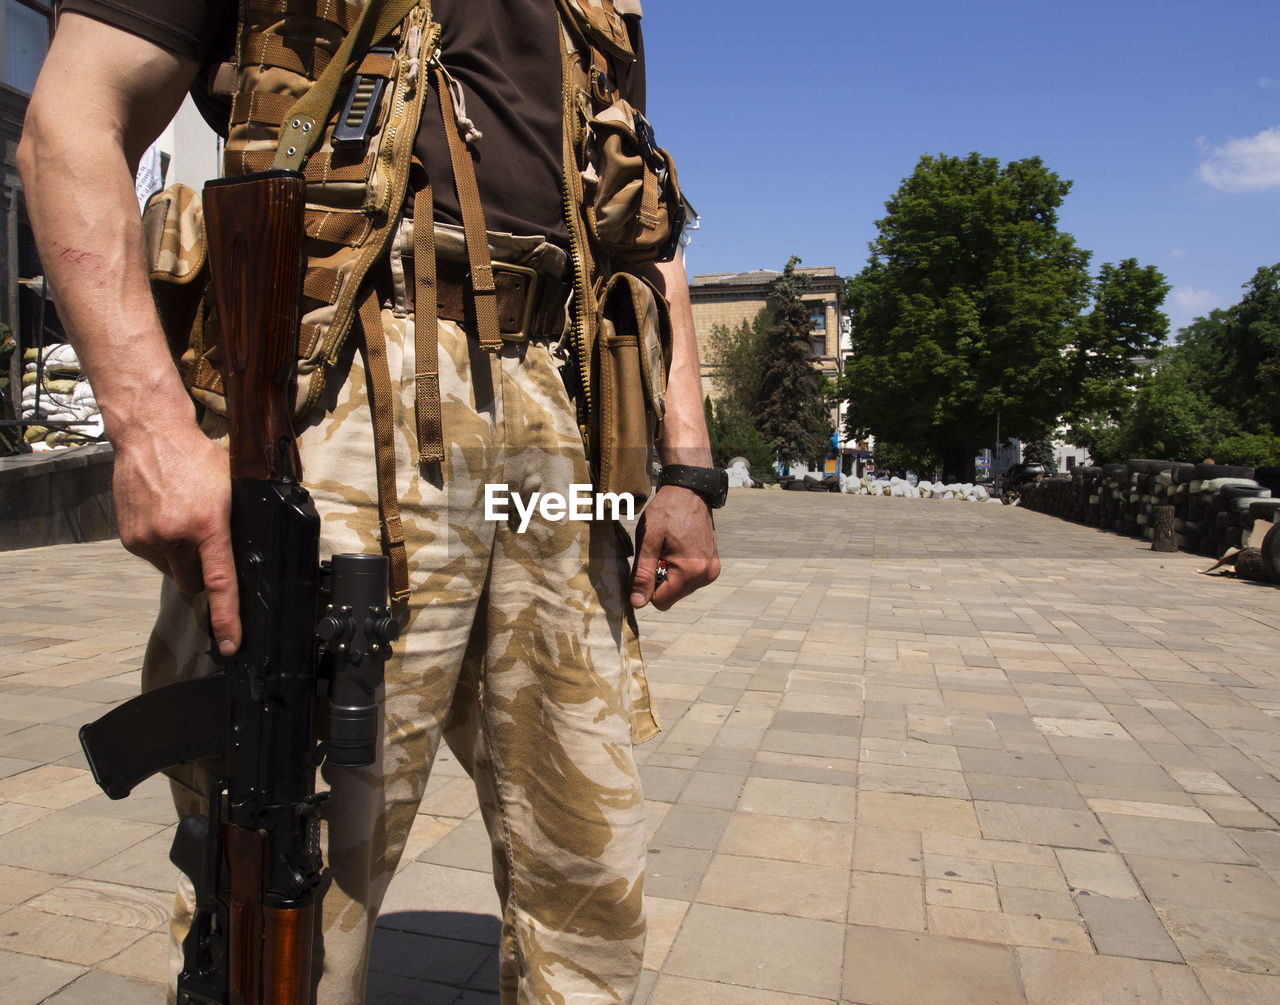 Midsection of military man holding rifle while standing in city